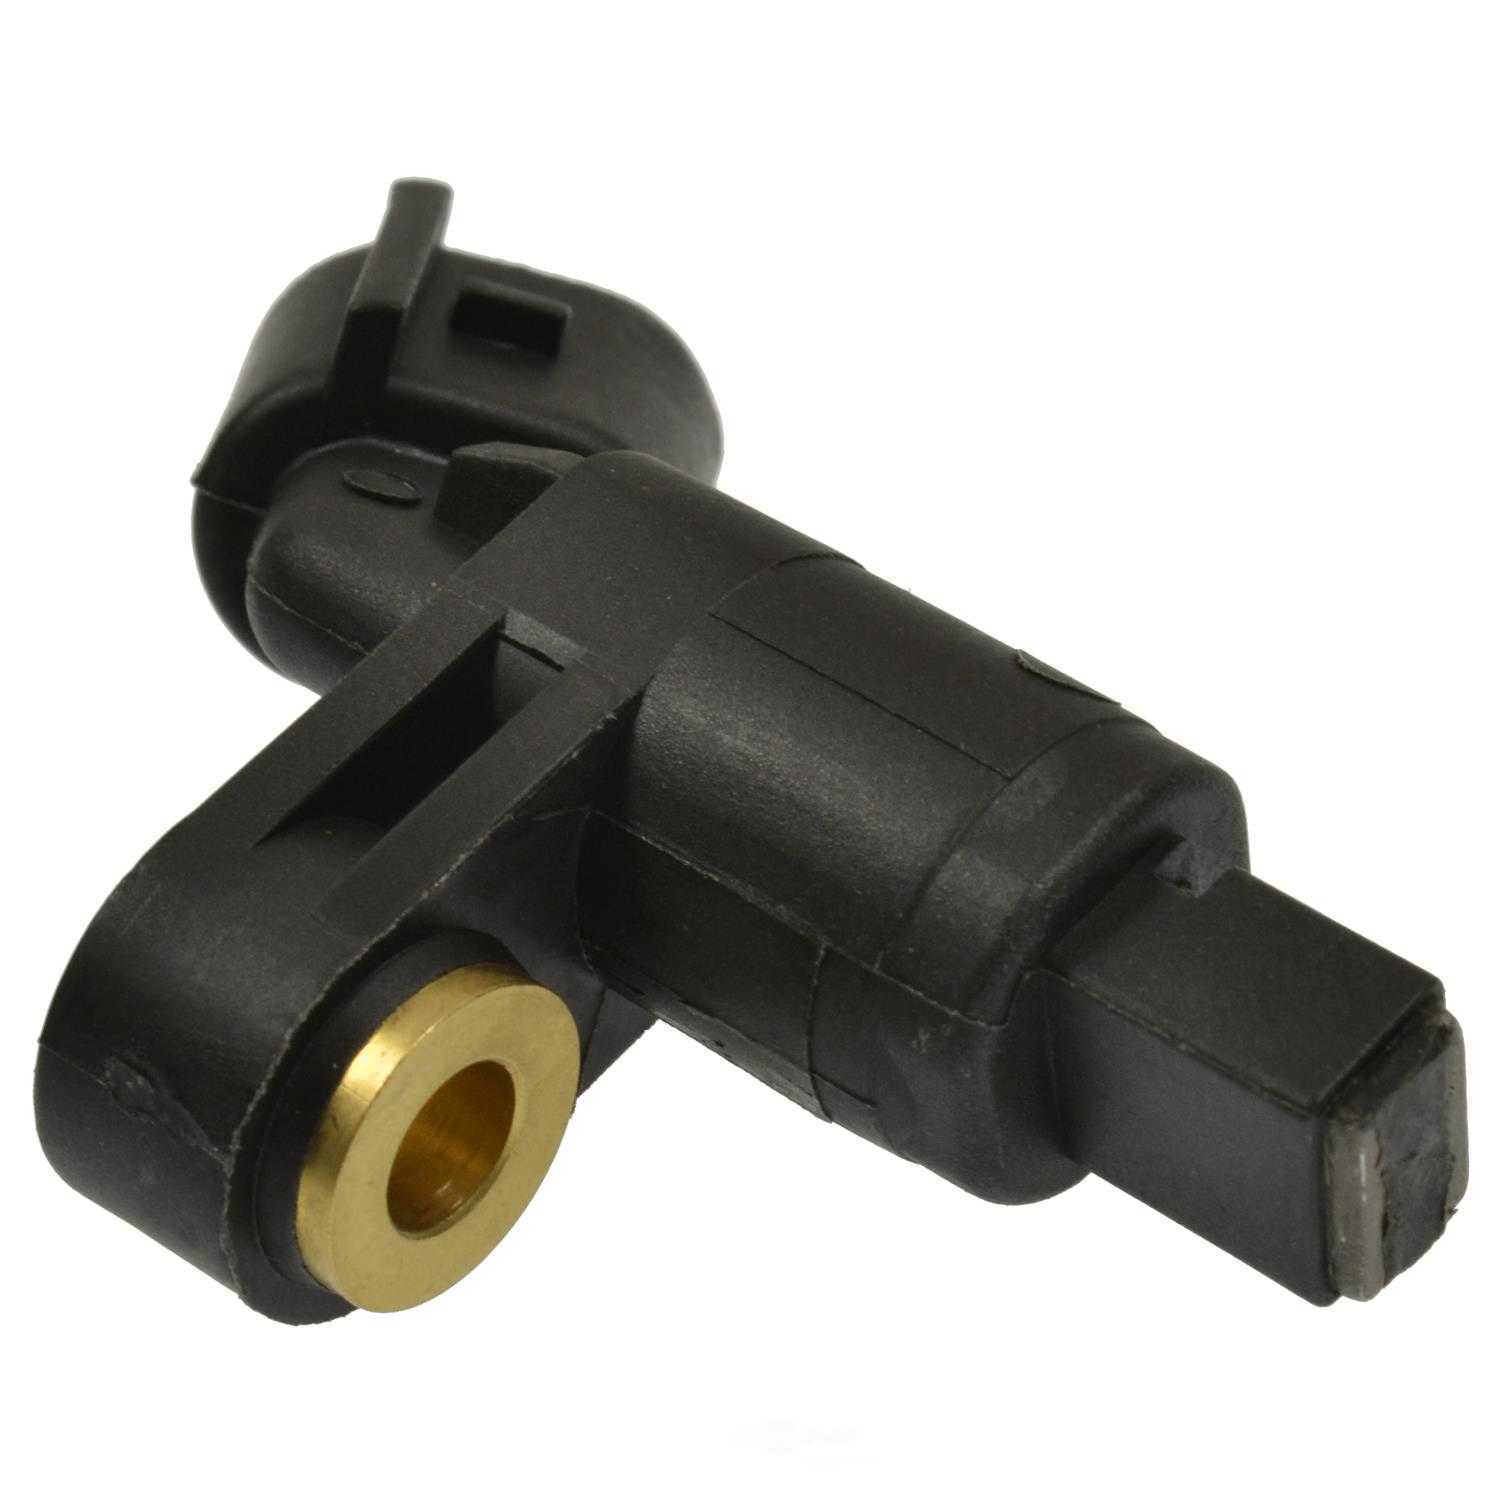 https://www.stockwiseauto.com/images/products/temp/PRD_773331_113_ALS470-Back.jpg